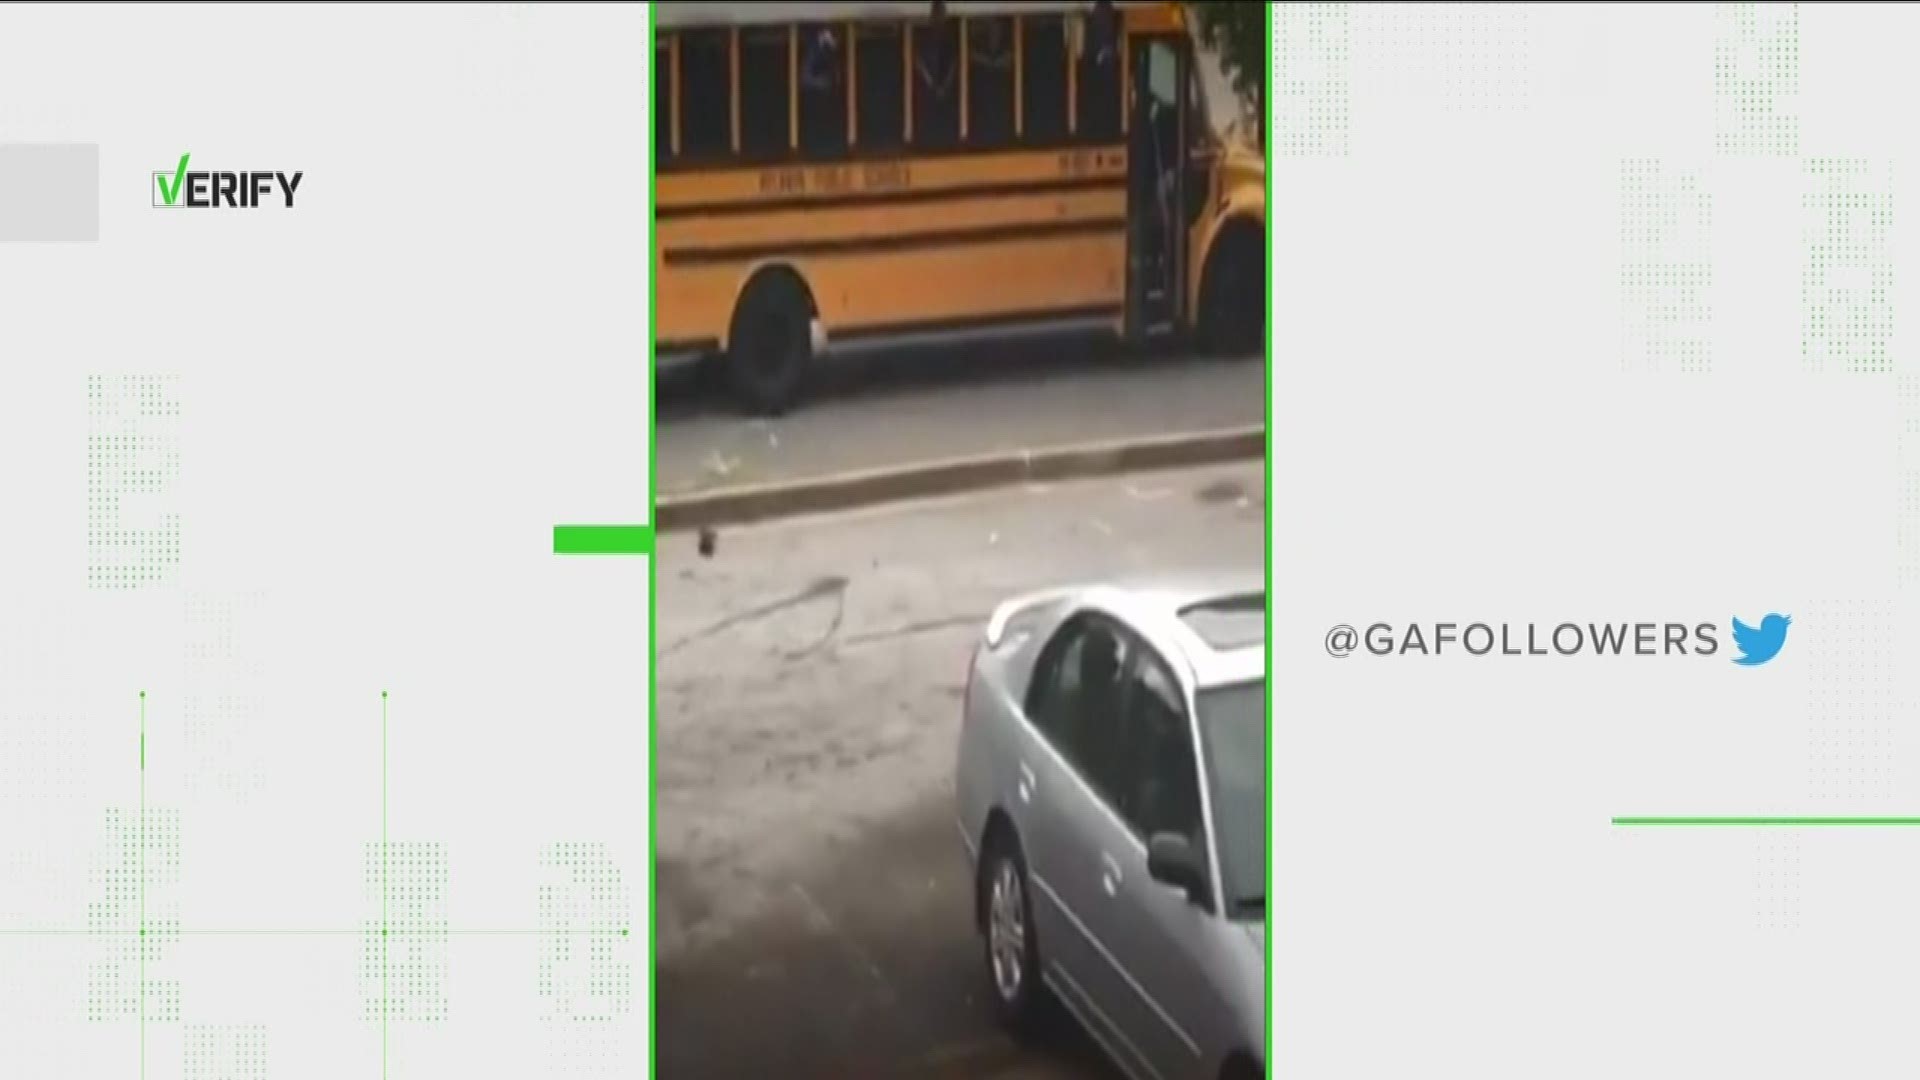 A viral video is making the rounds appearing to show shenanigans on board an APS bus. What really happened?